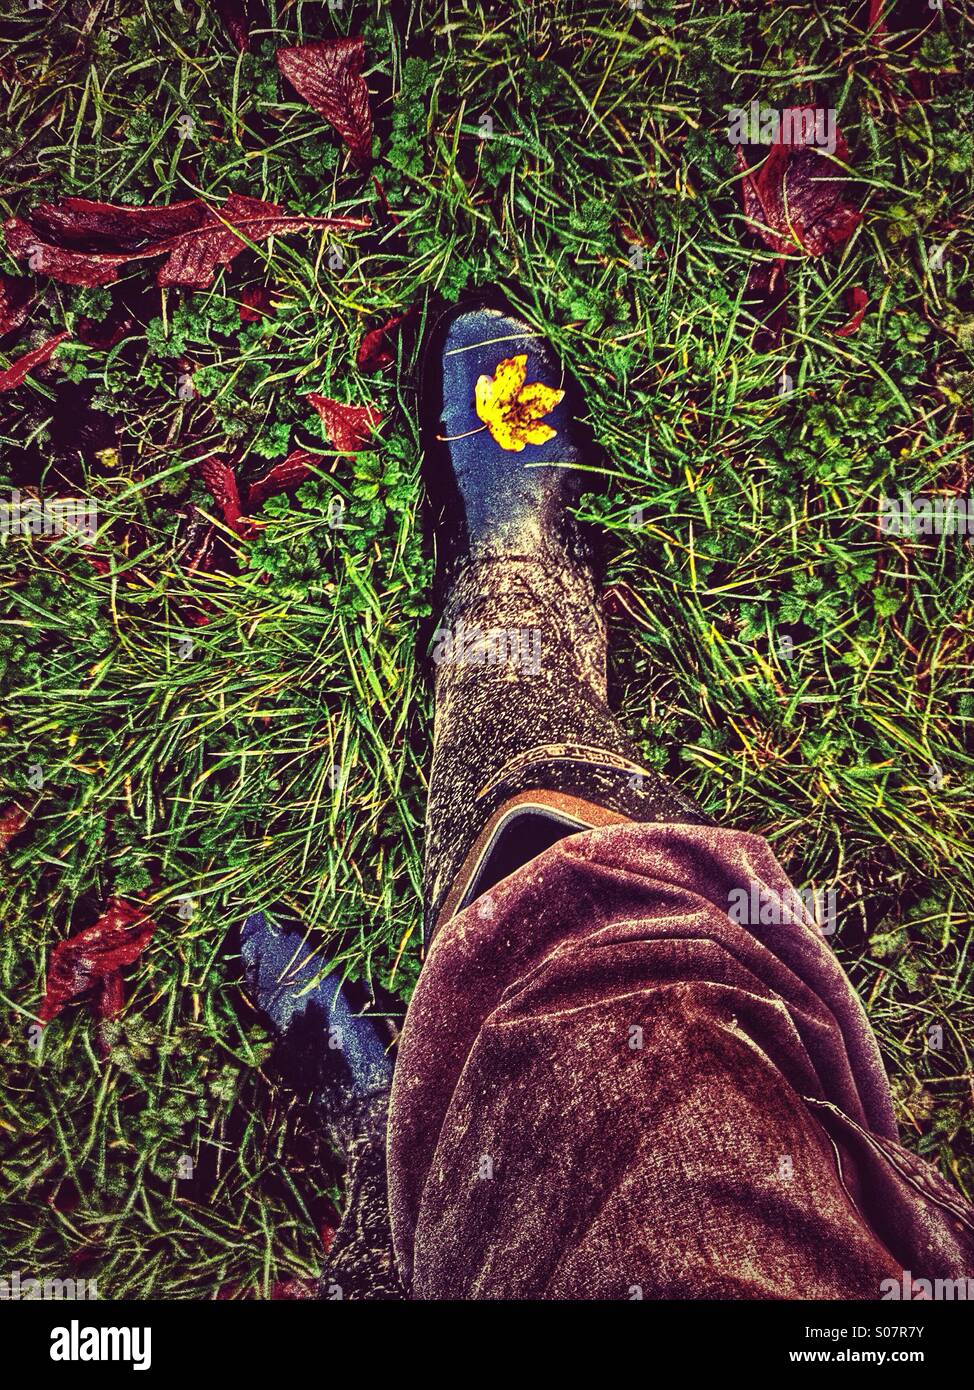 Looking down the legs of male to Wellingtons with single autumnal leaf on toe Stock Photo